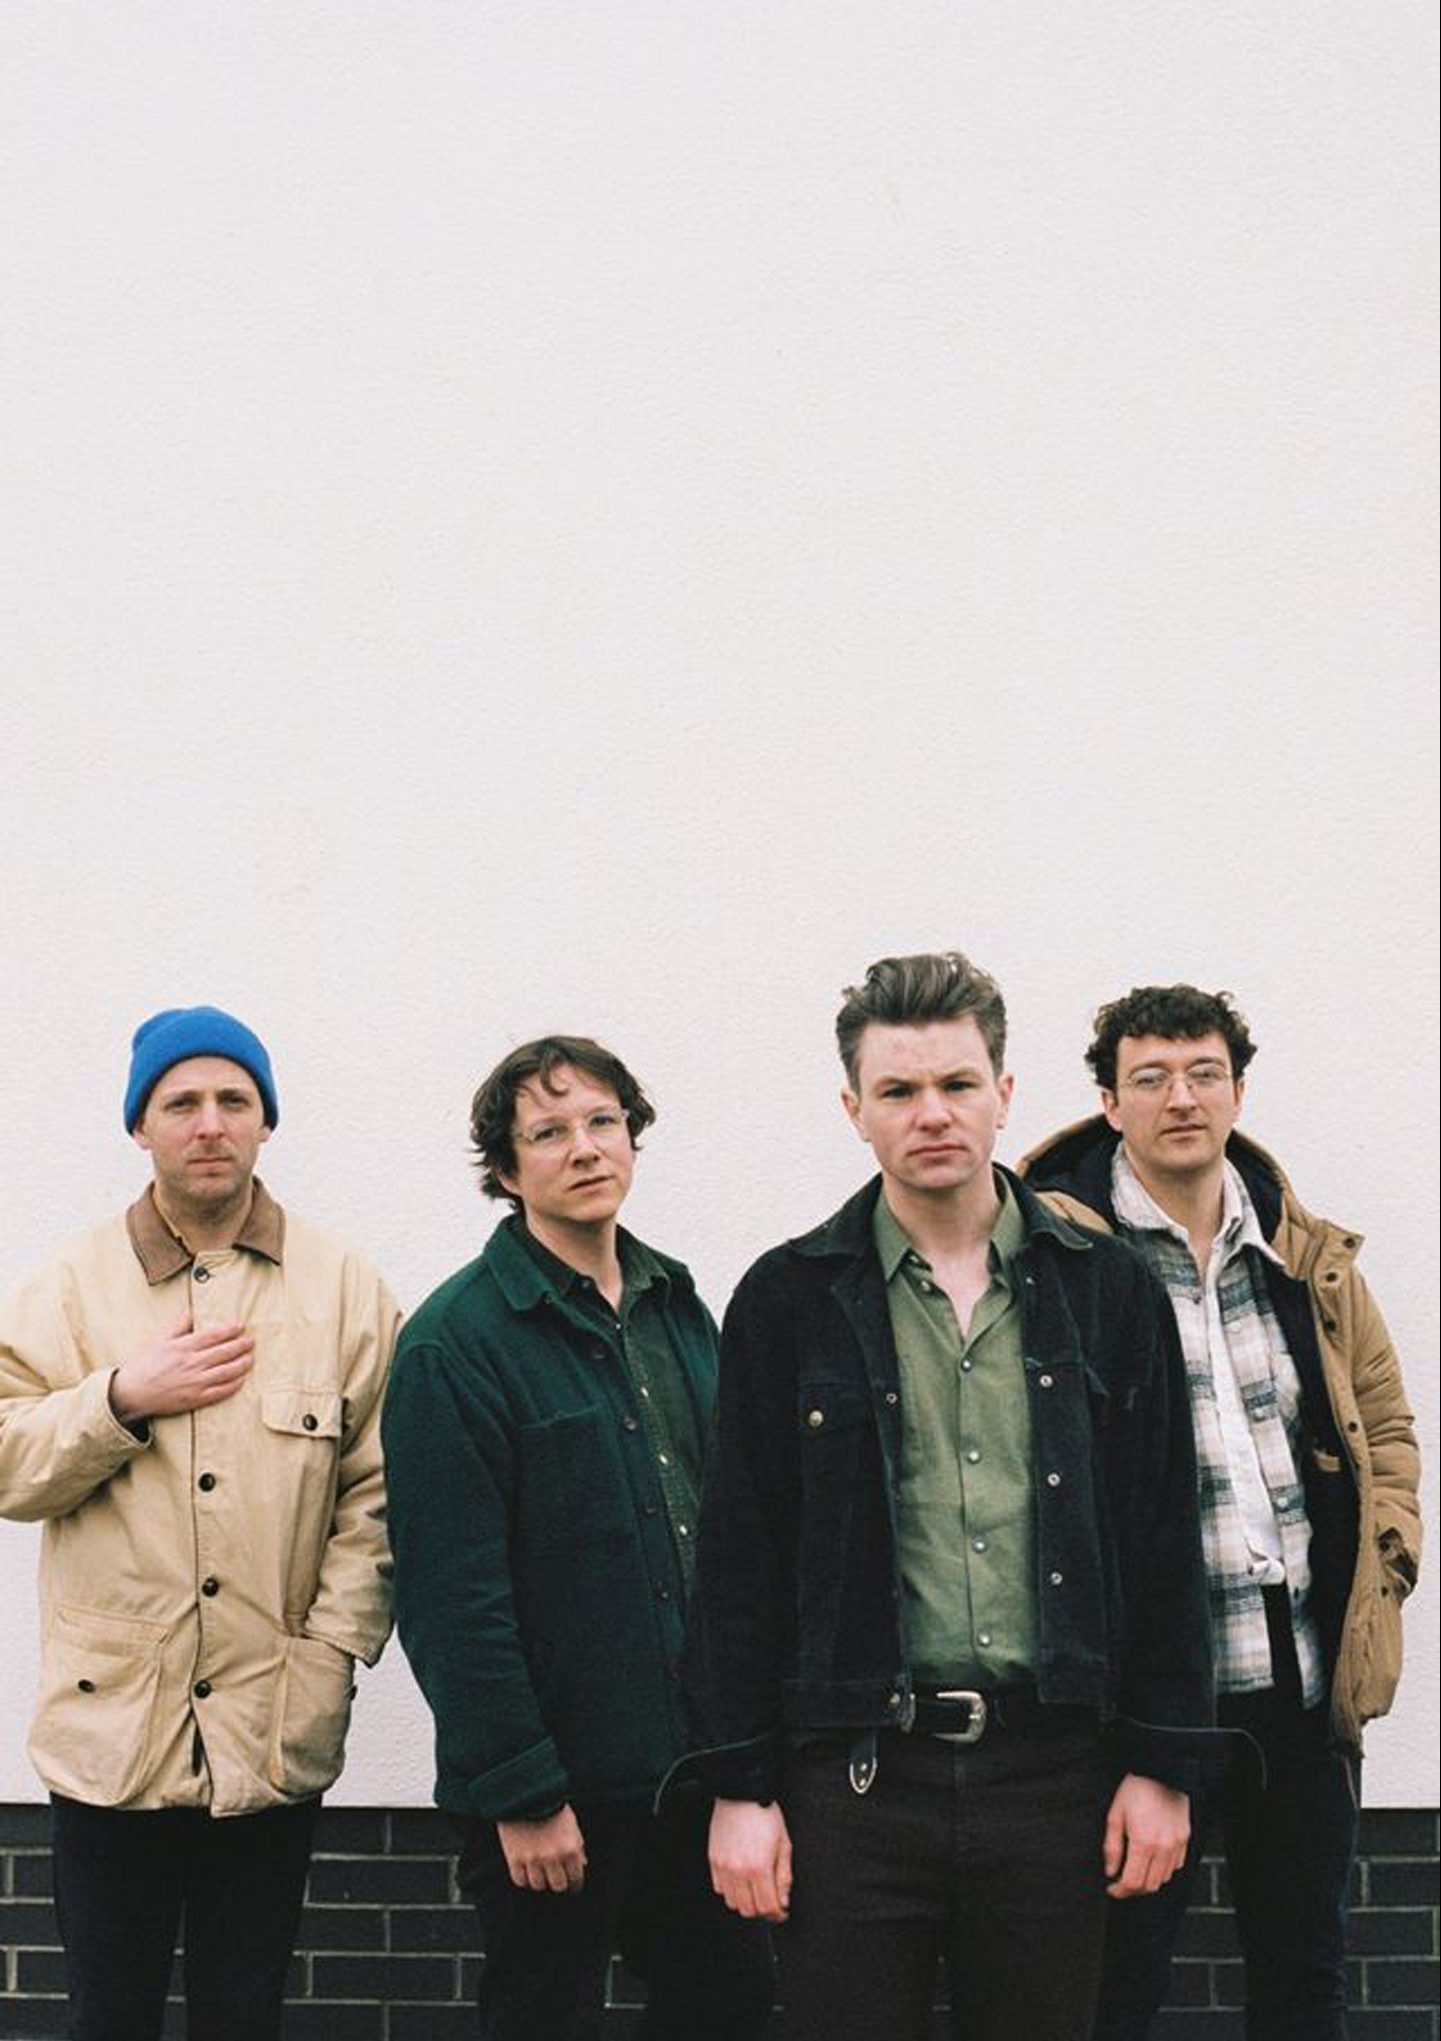 John O'Groats band Neon Waltz have collaborated with legend Edwyn Collins. Image supplied by Ignition Management